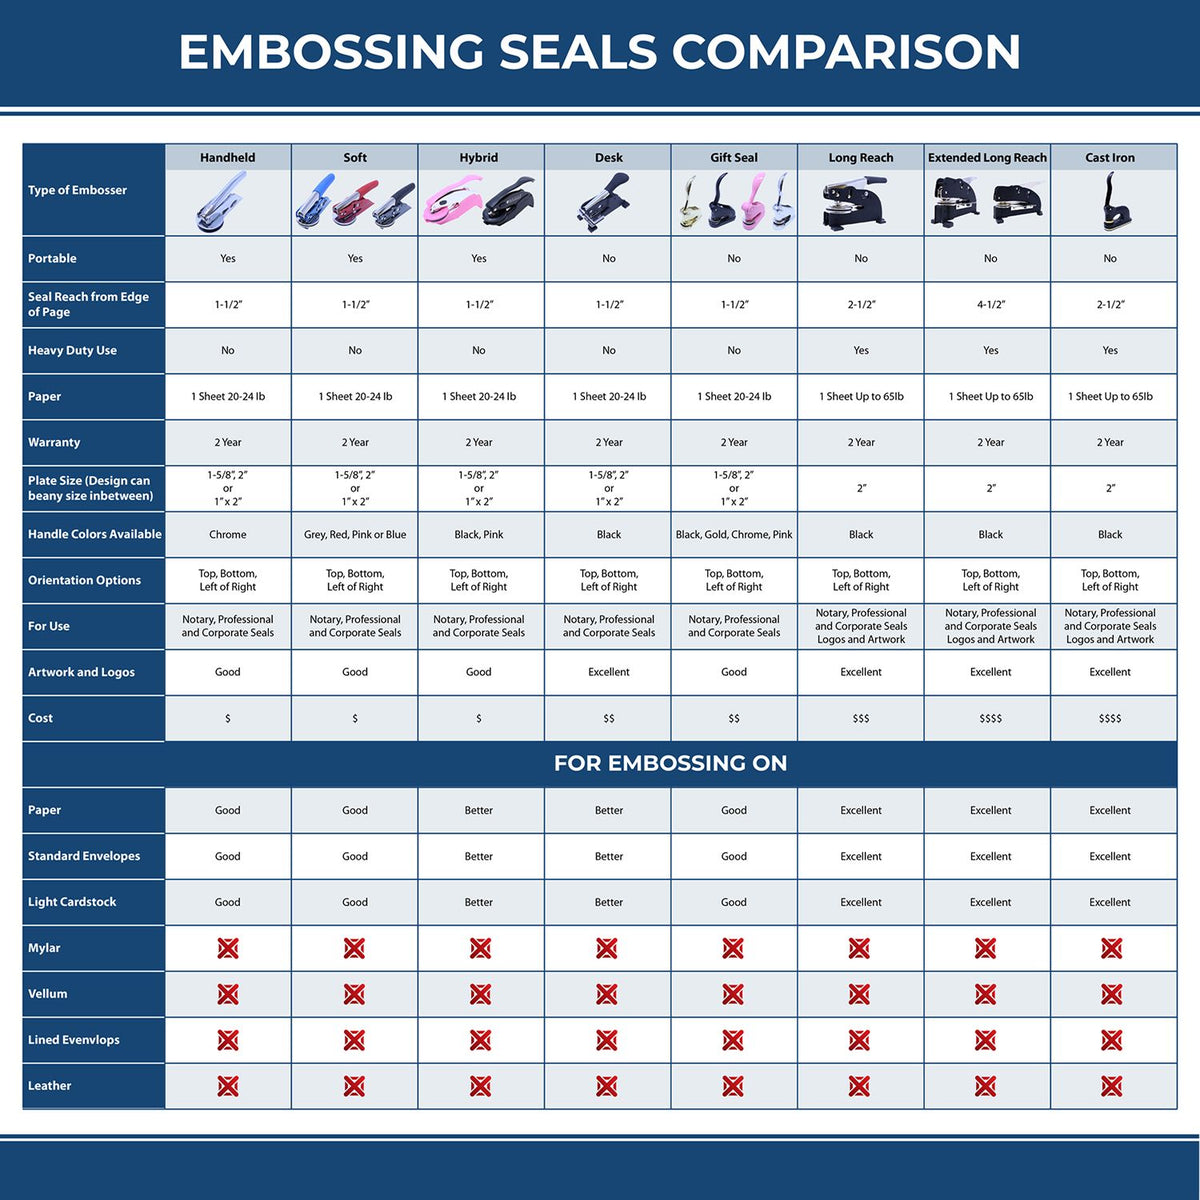 A comparison chart for the different types of mount models available for the Handheld Delaware Land Surveyor Seal.